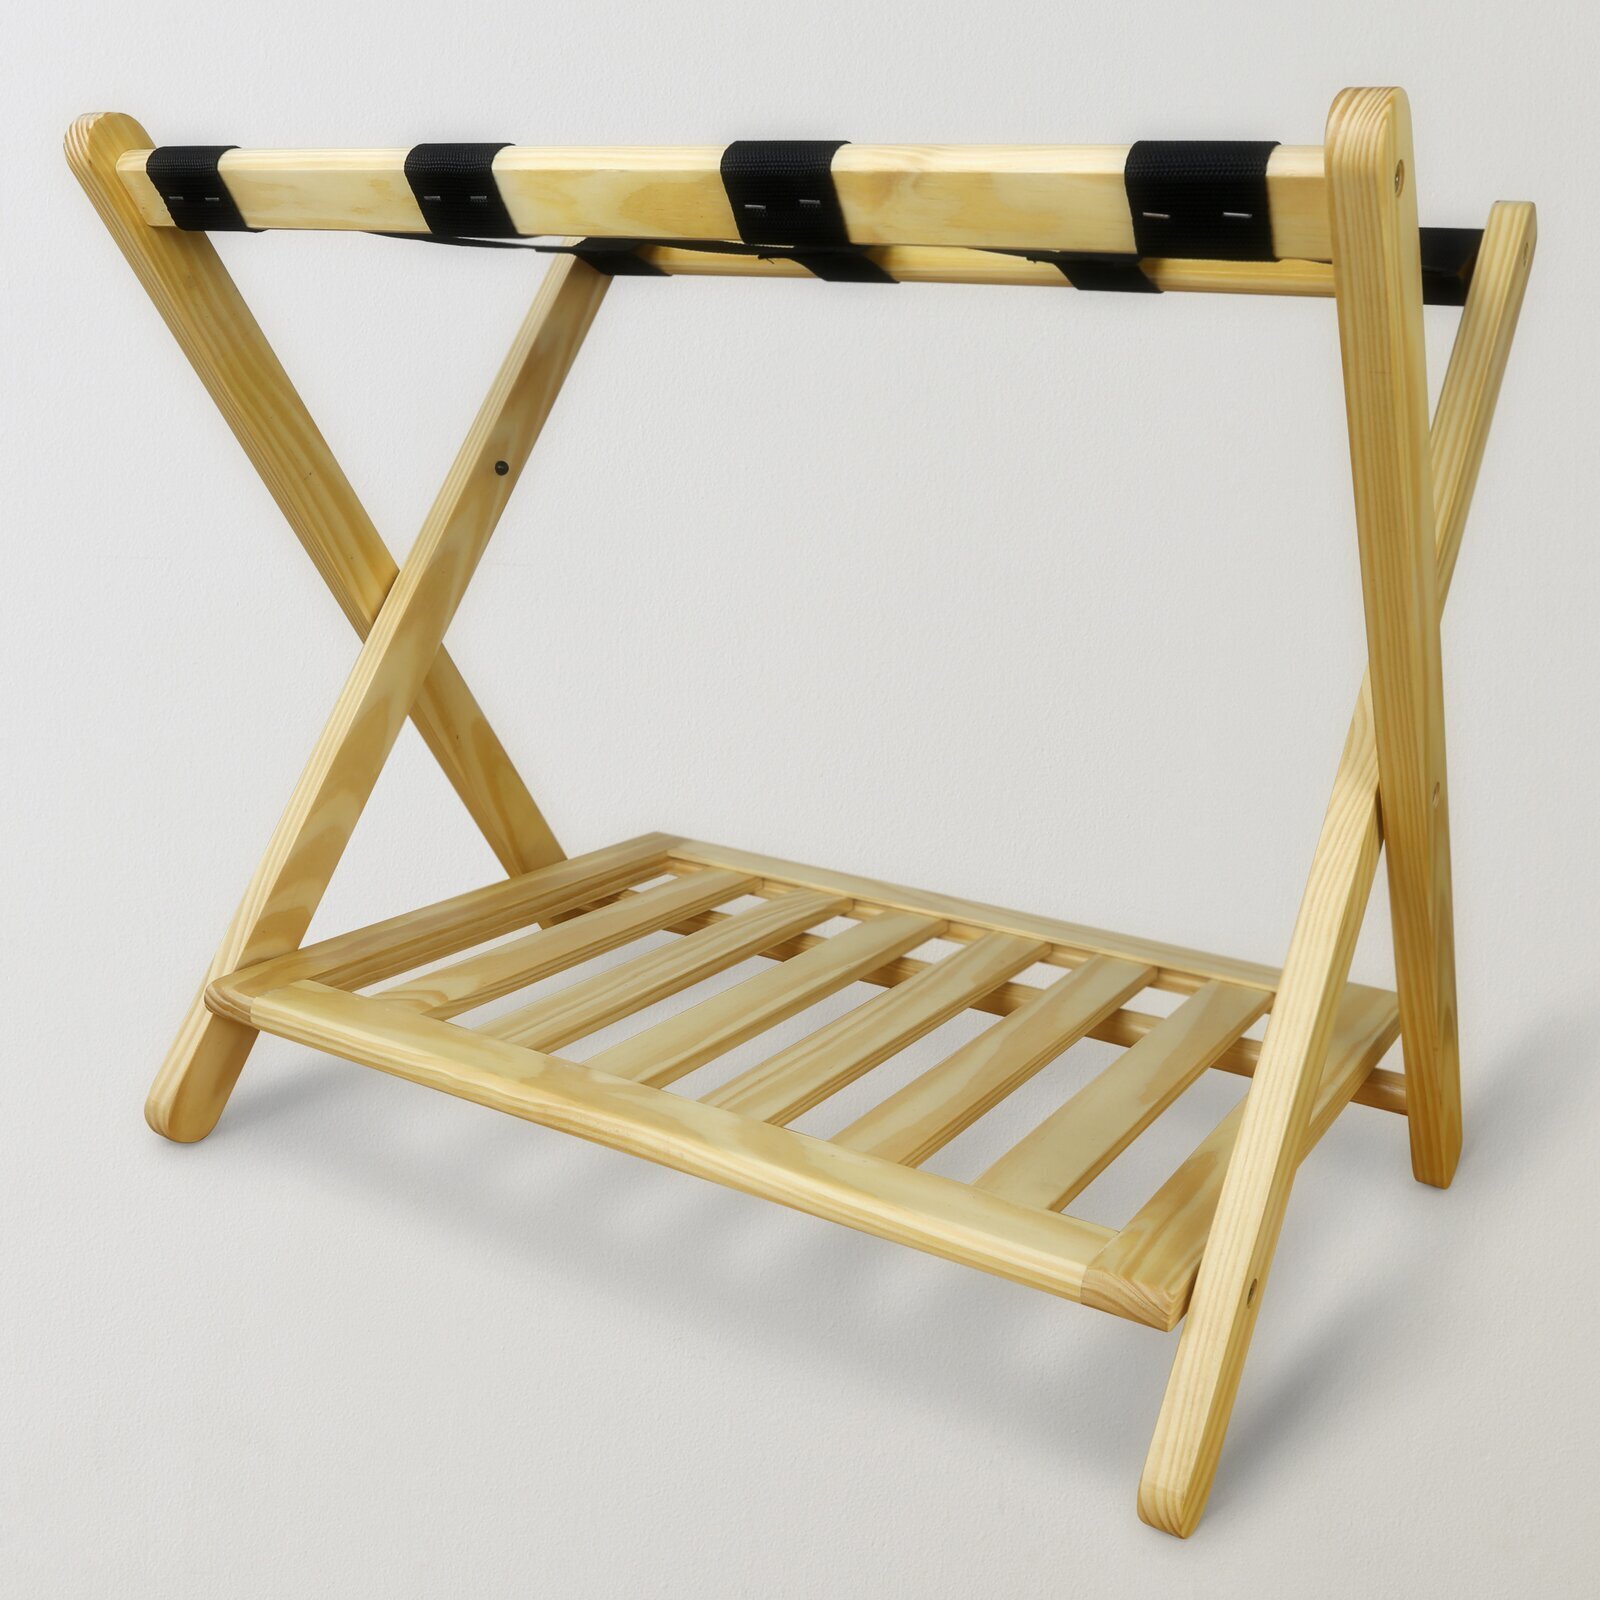 Two layer luggage rack for guest room